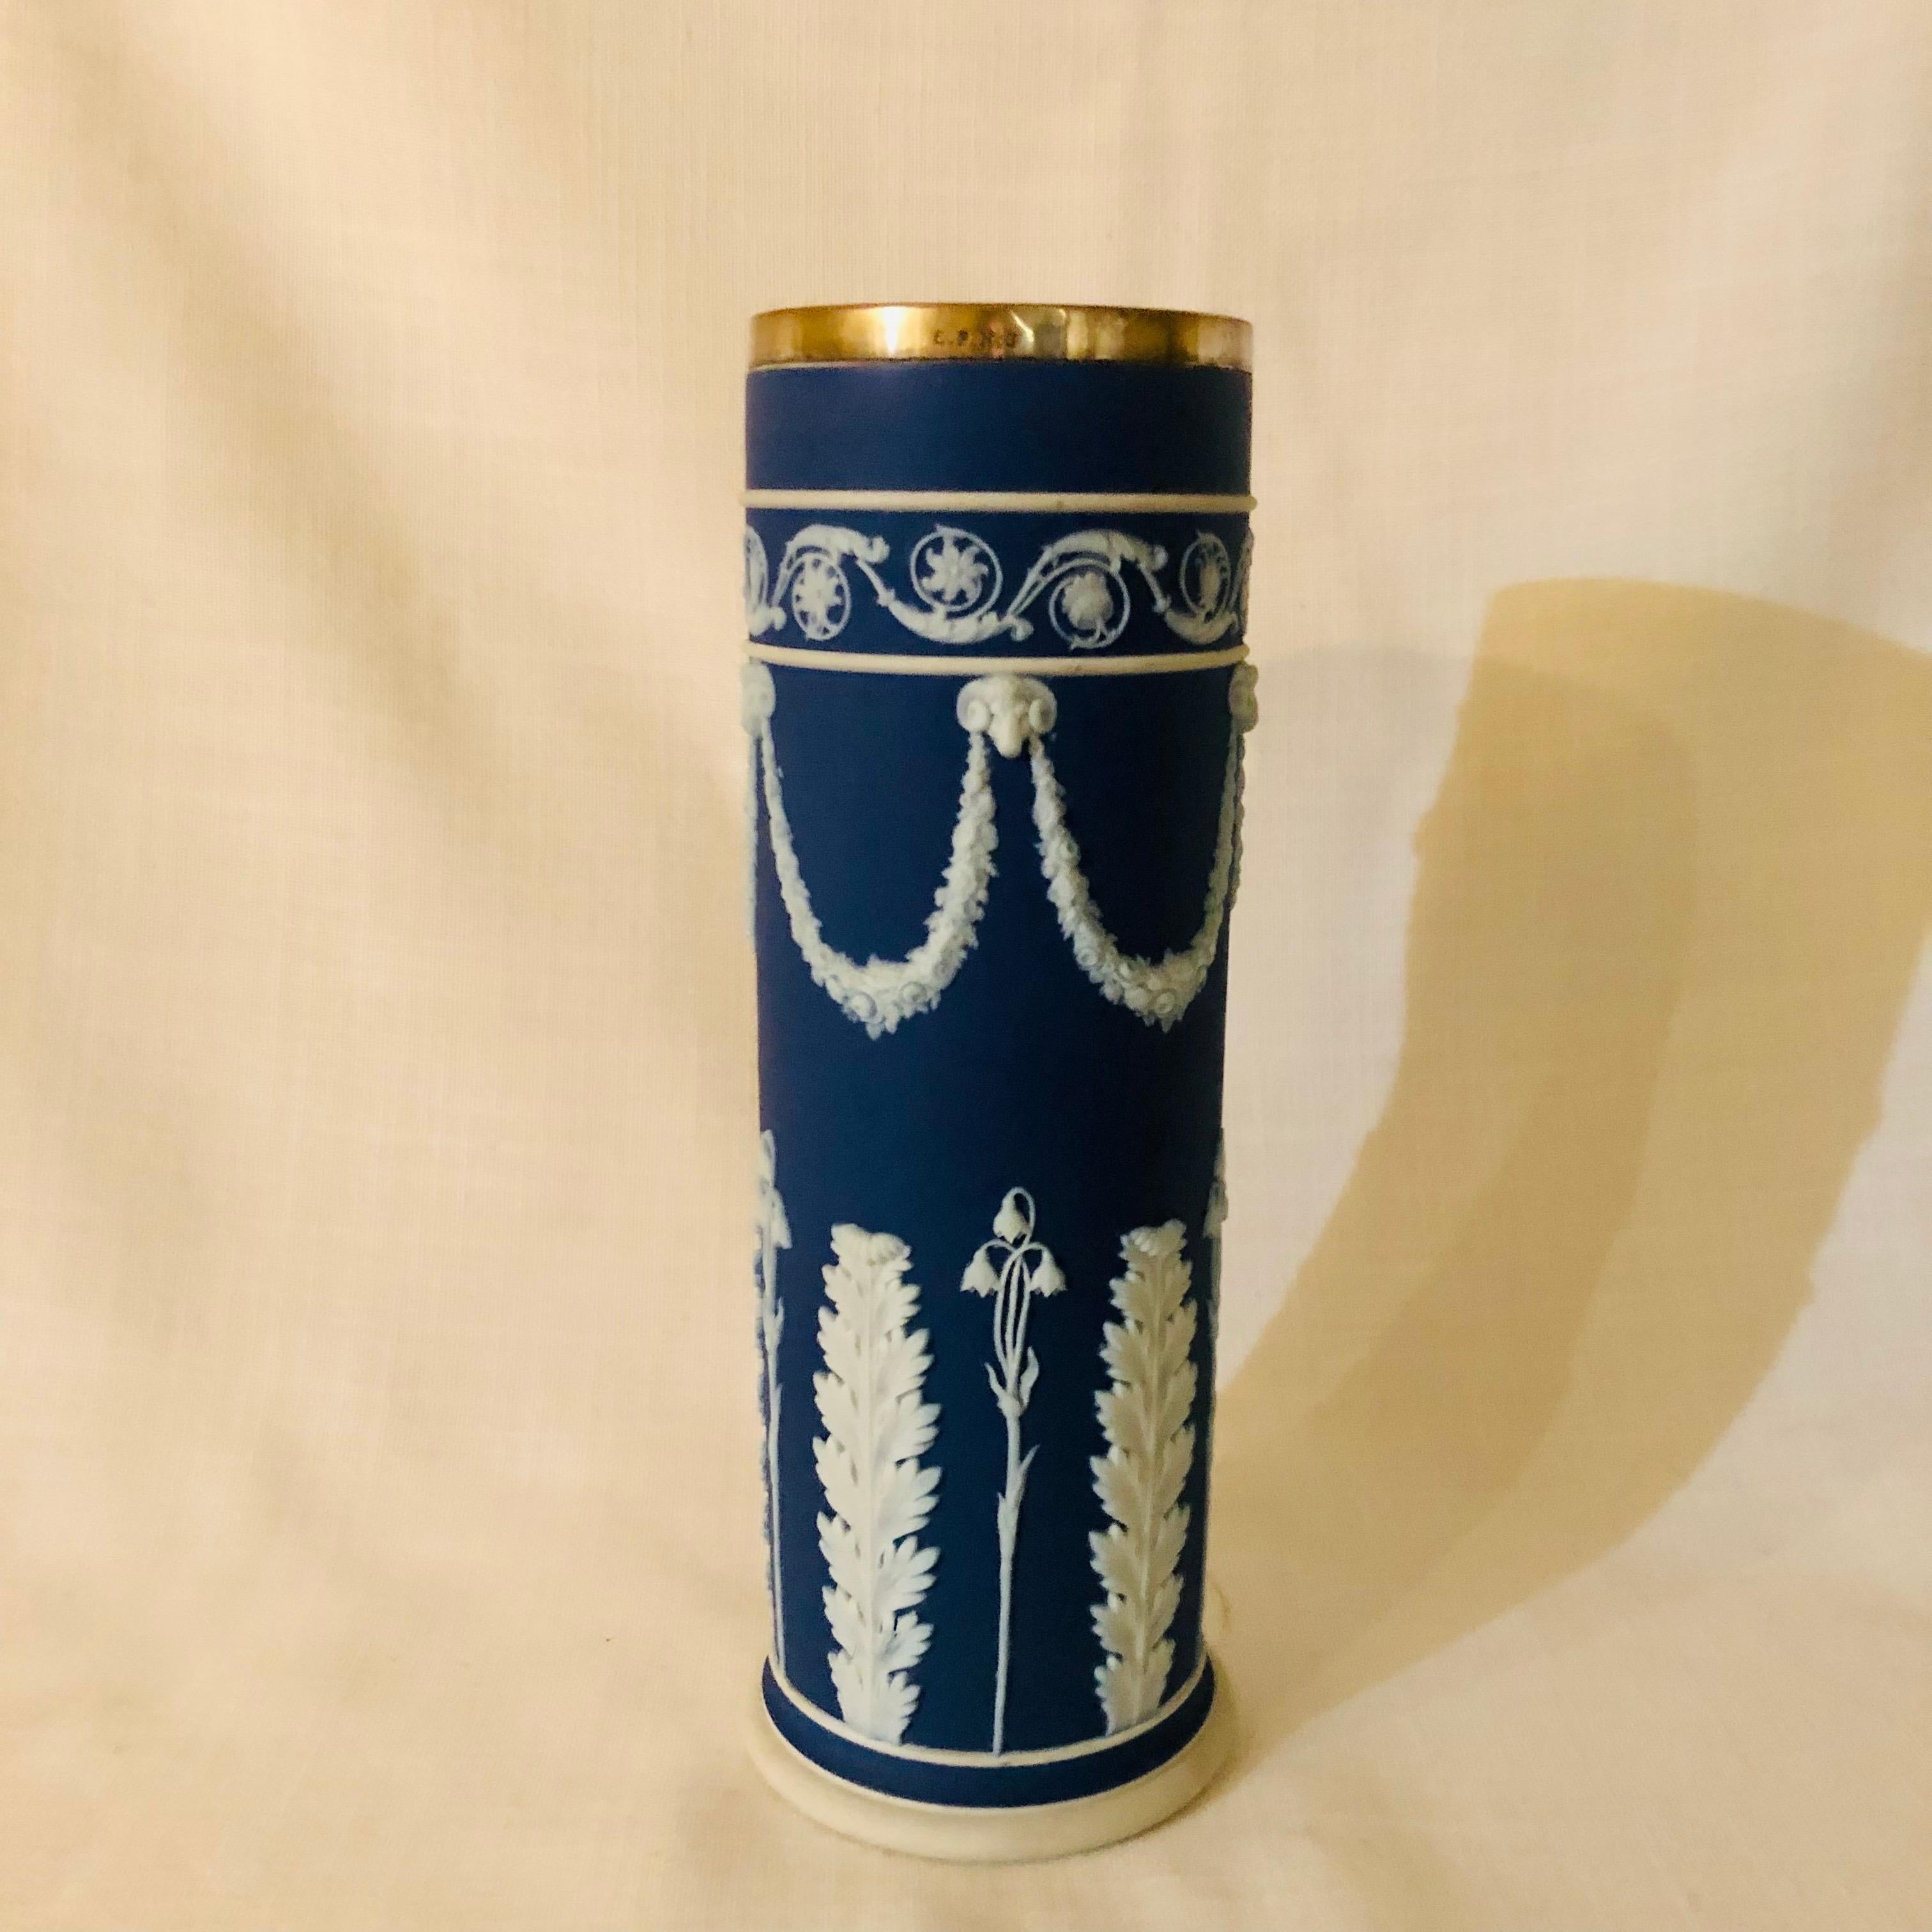 I want to offer you this antique Wedgwood dark blue jasperware vase decorated with rams heads and lilies of the valley with a silver plated rim on top. This decoration is one of my favorite jasperware decorations, as I personally love lilies of the